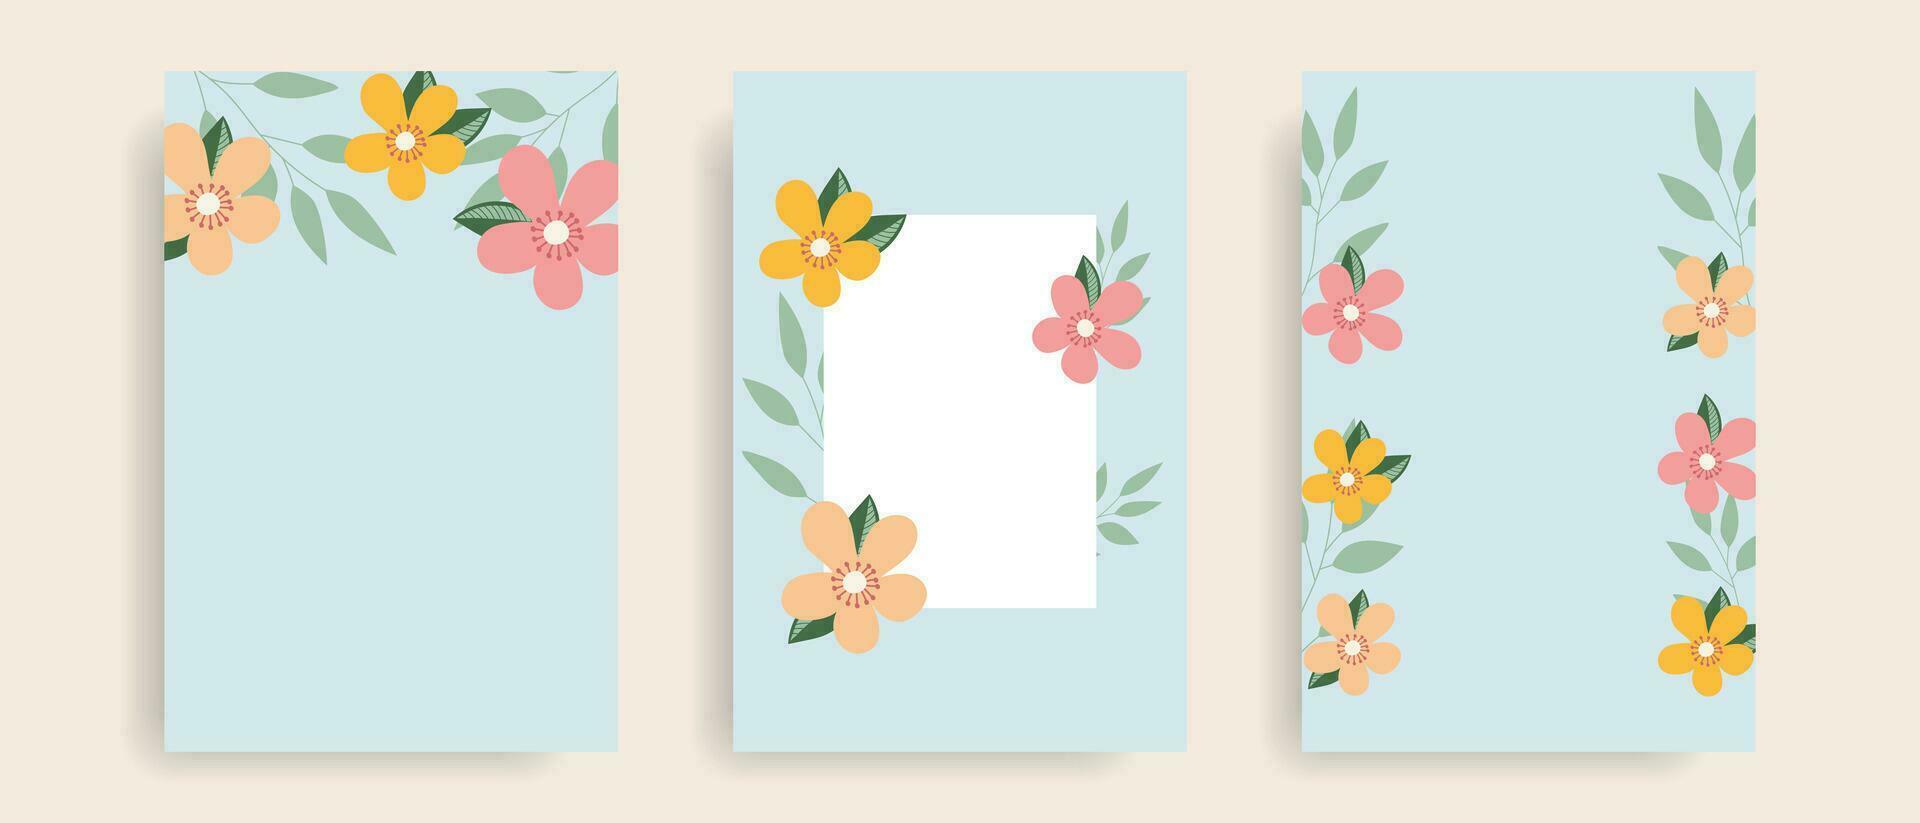 Set of artistic floral patterns with border. Frames with flowers. vector